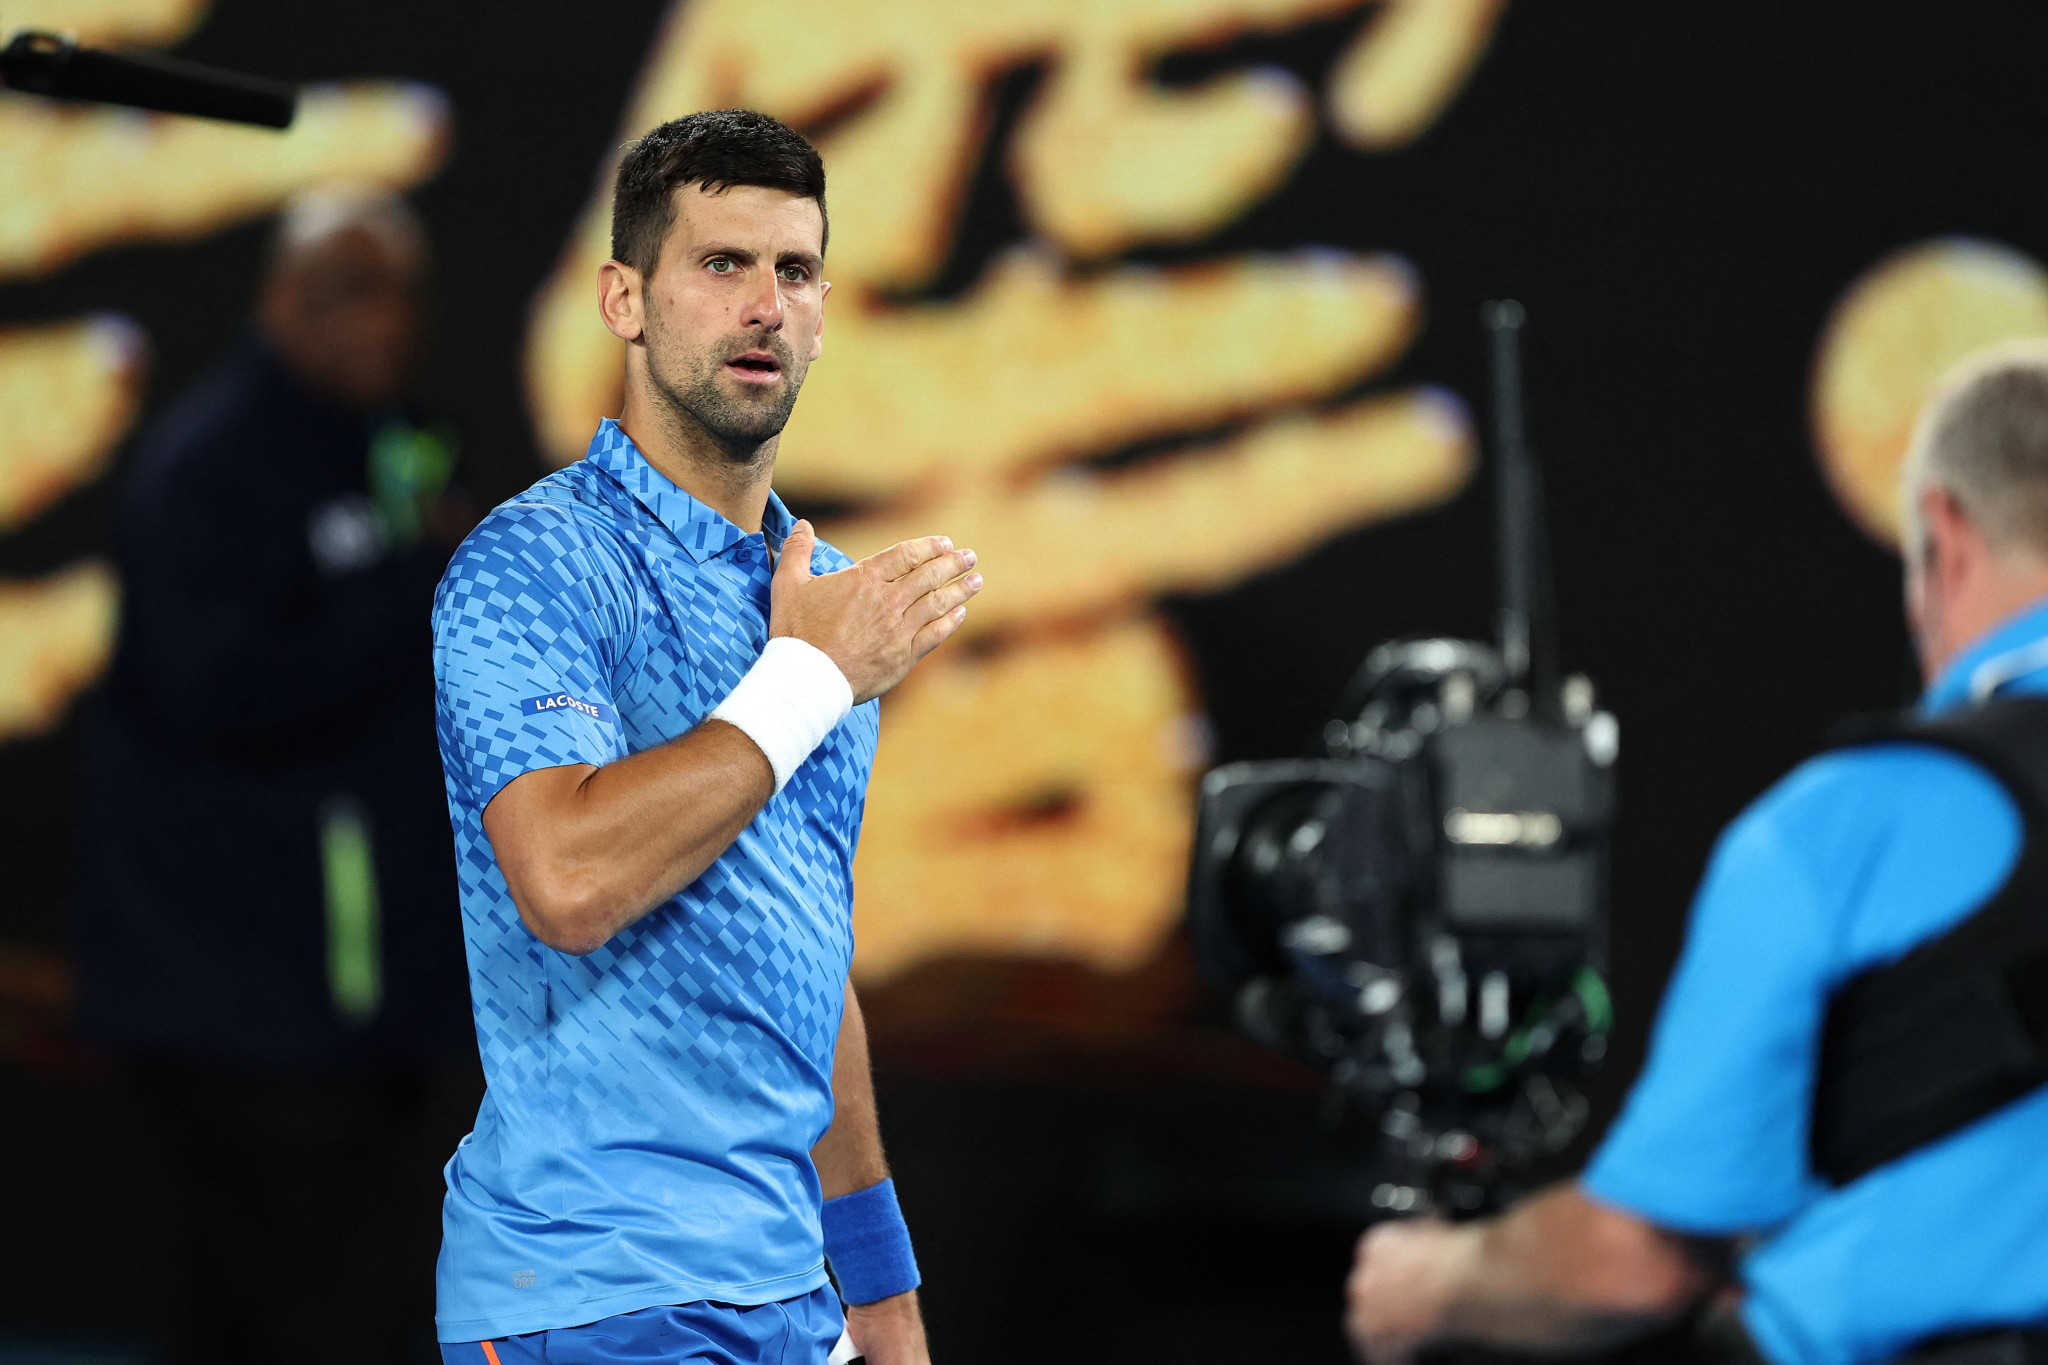 Serbia's Novak Djokovic dropped a set to France's Enzo Couacaud, but the fourth seed progressed to the third round of the Australian Open ©Getty Images